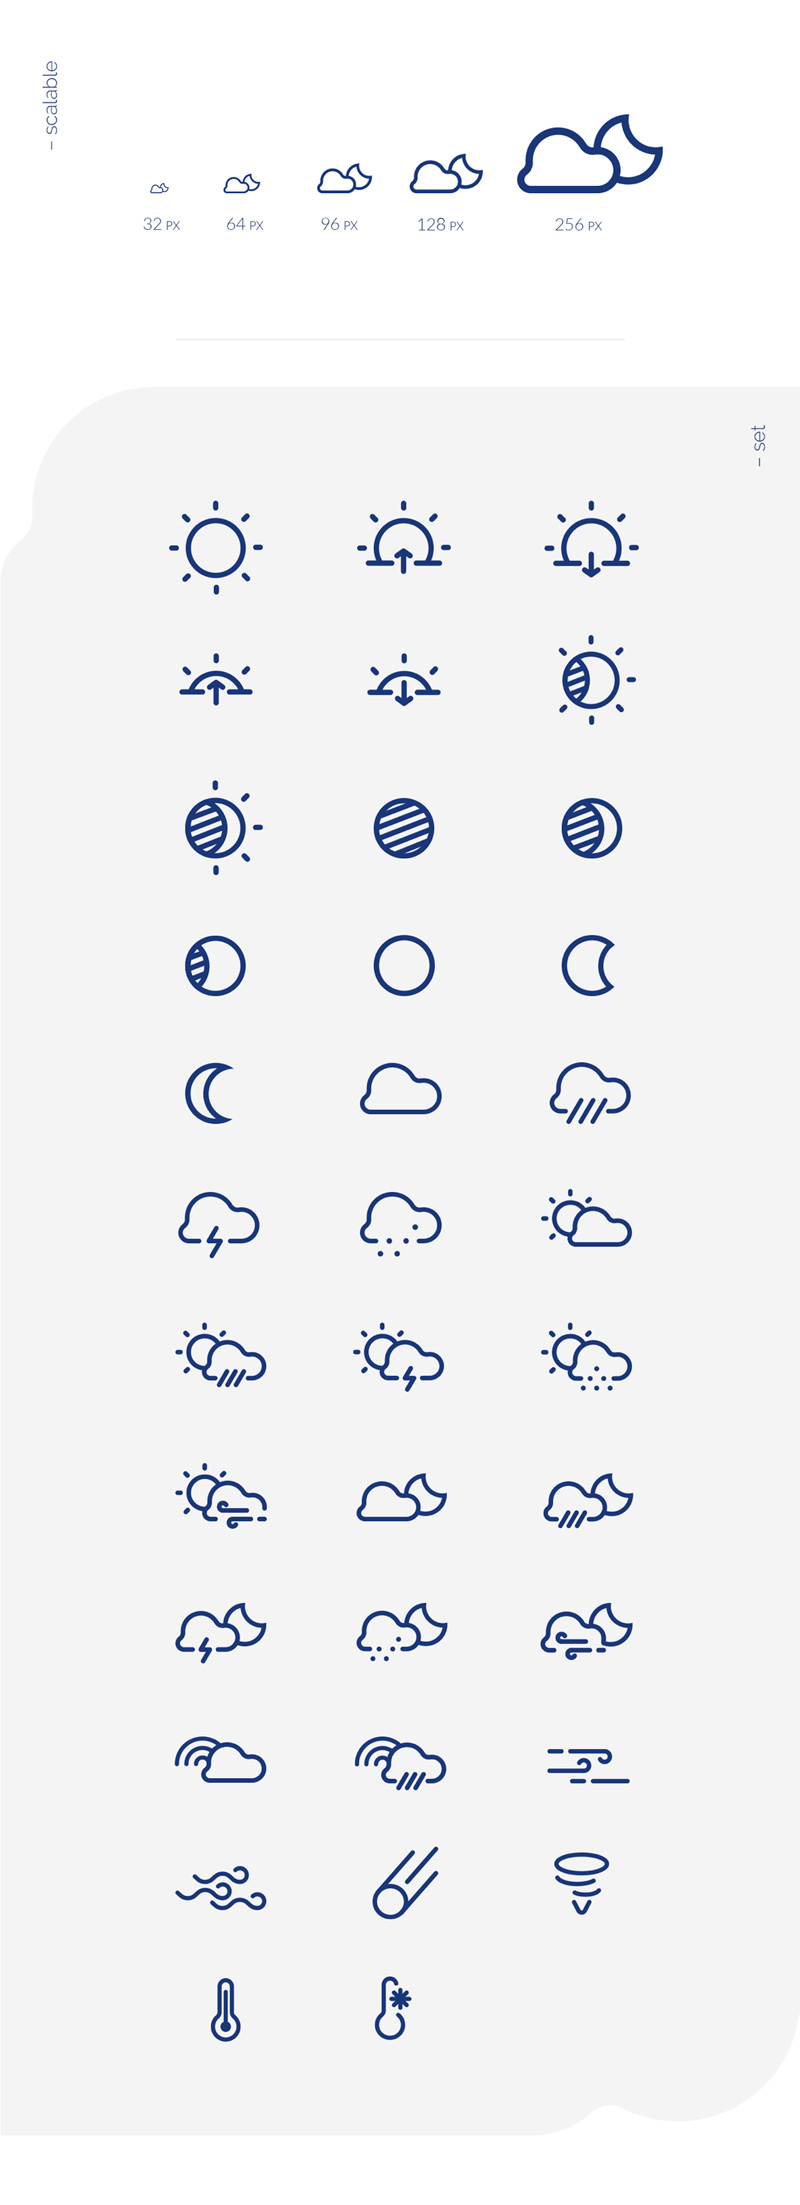 Weather Icons – Free Vector Pack